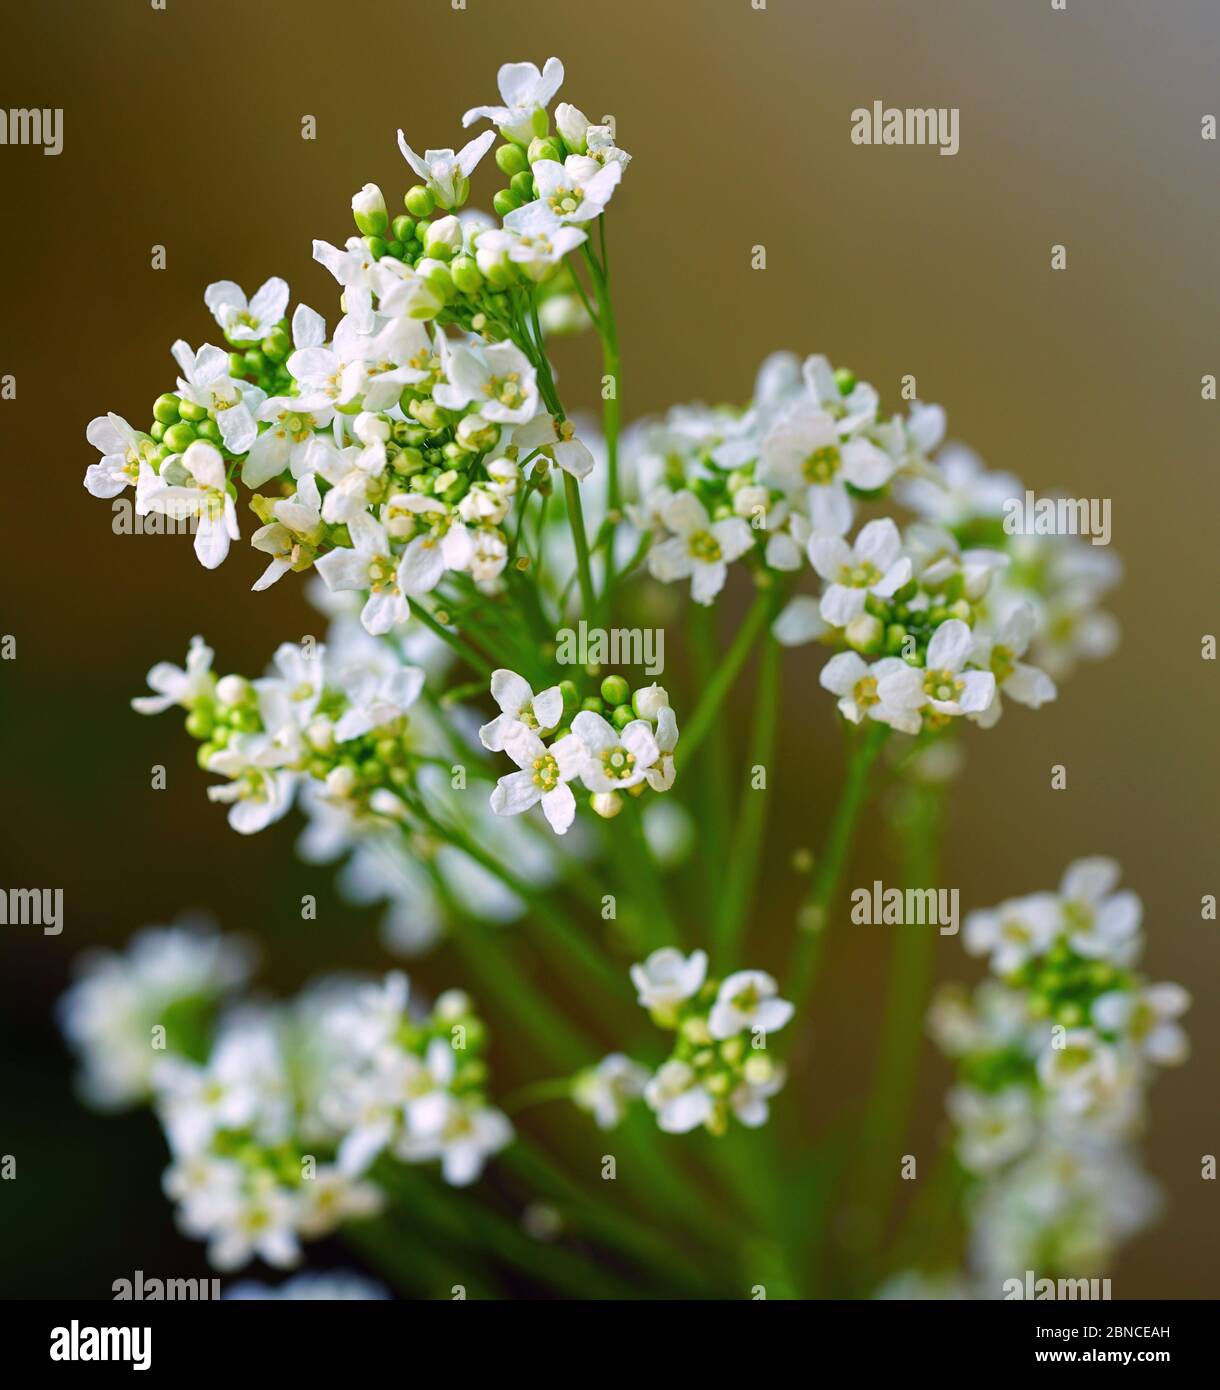 Flowers and leaves of the horseradish plant (armoracia rusticana) Stock Photo